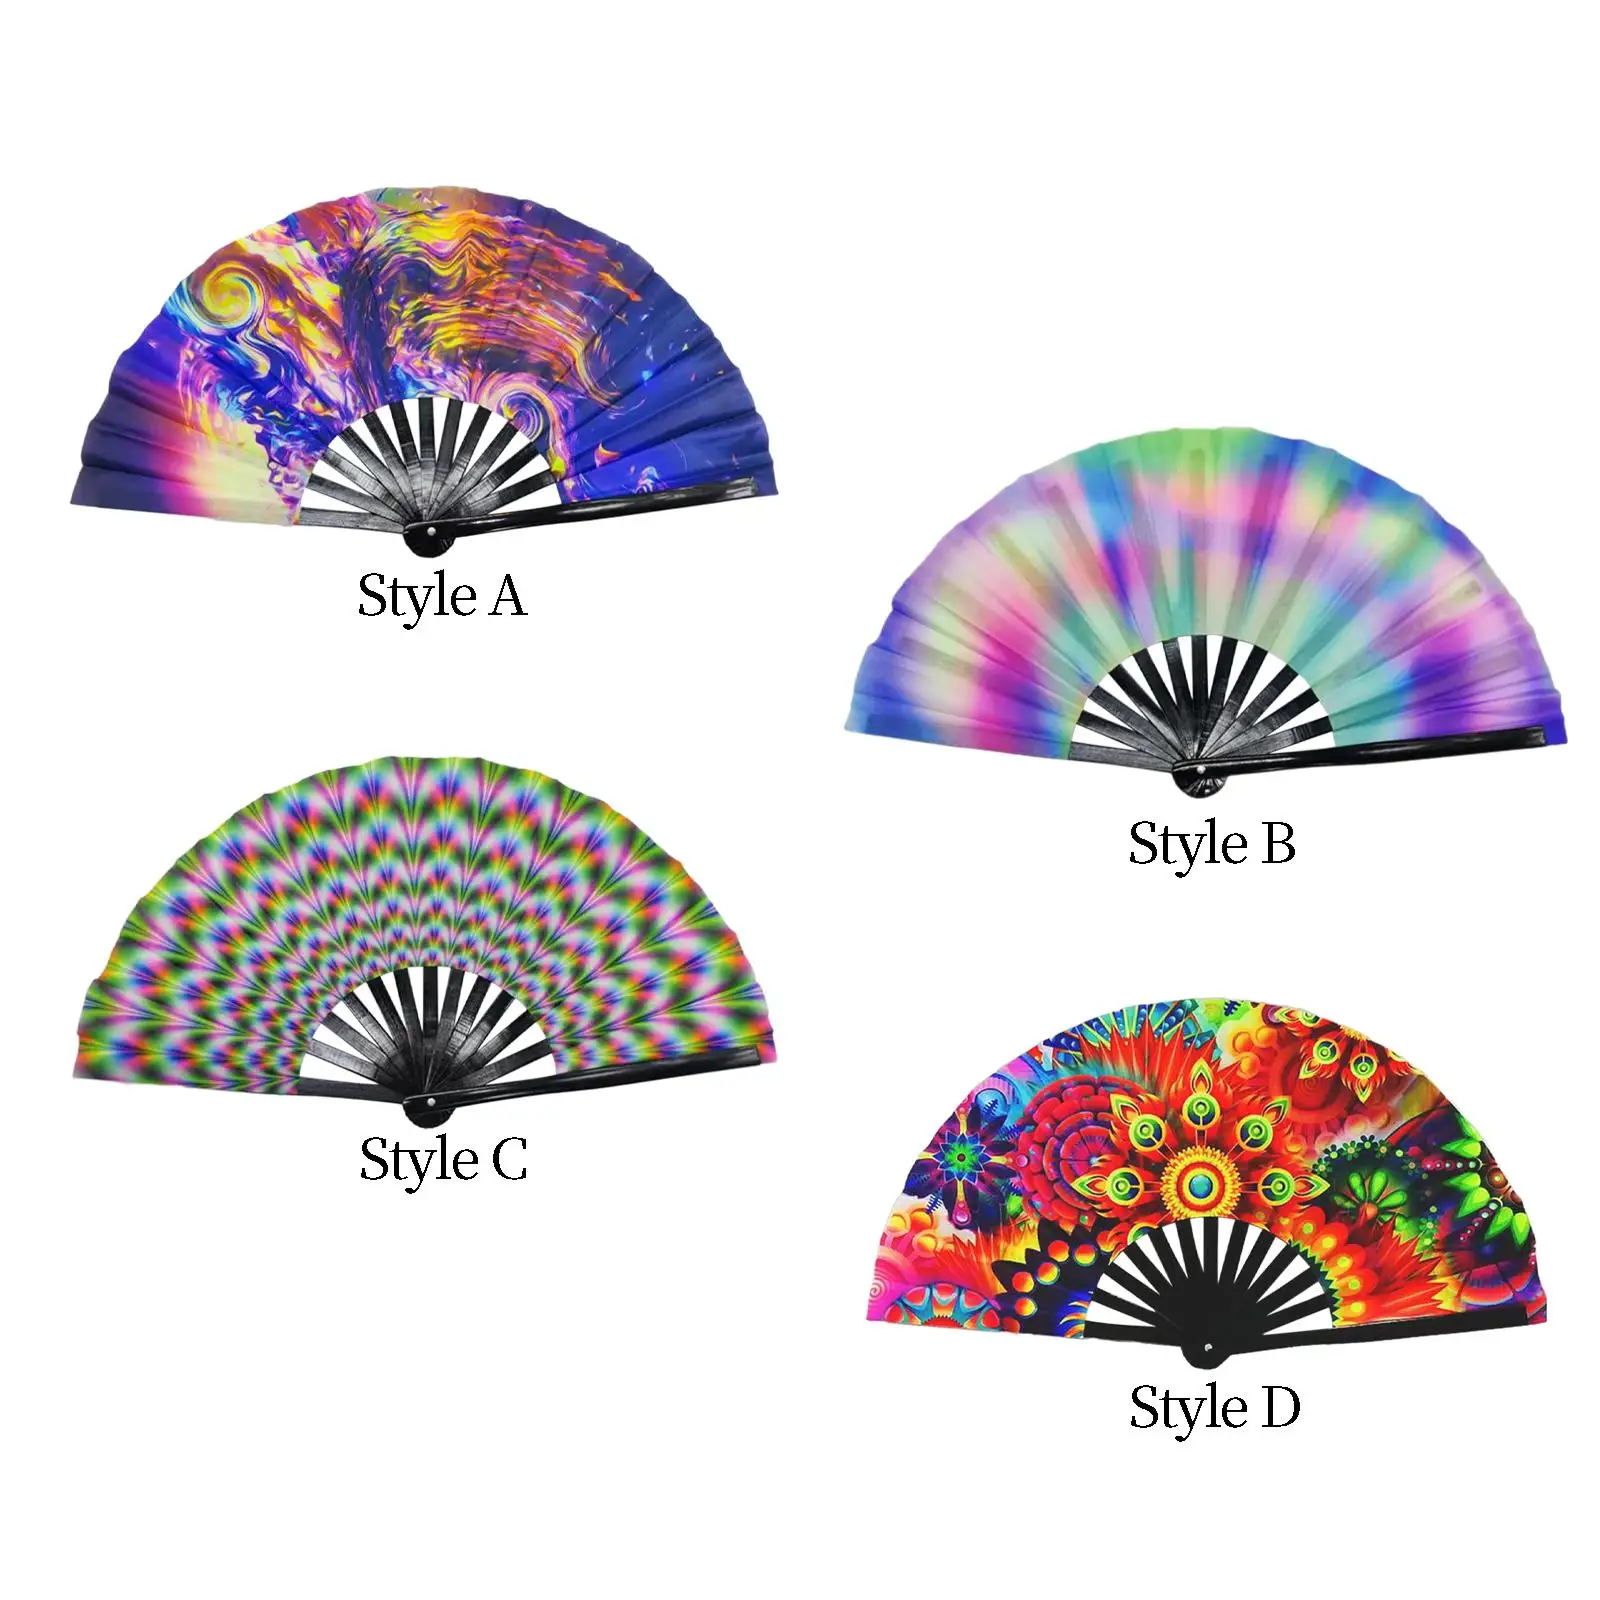 Folding Hand Fan Fluorescent Effects for Concerts Martial Arts Fans Parties